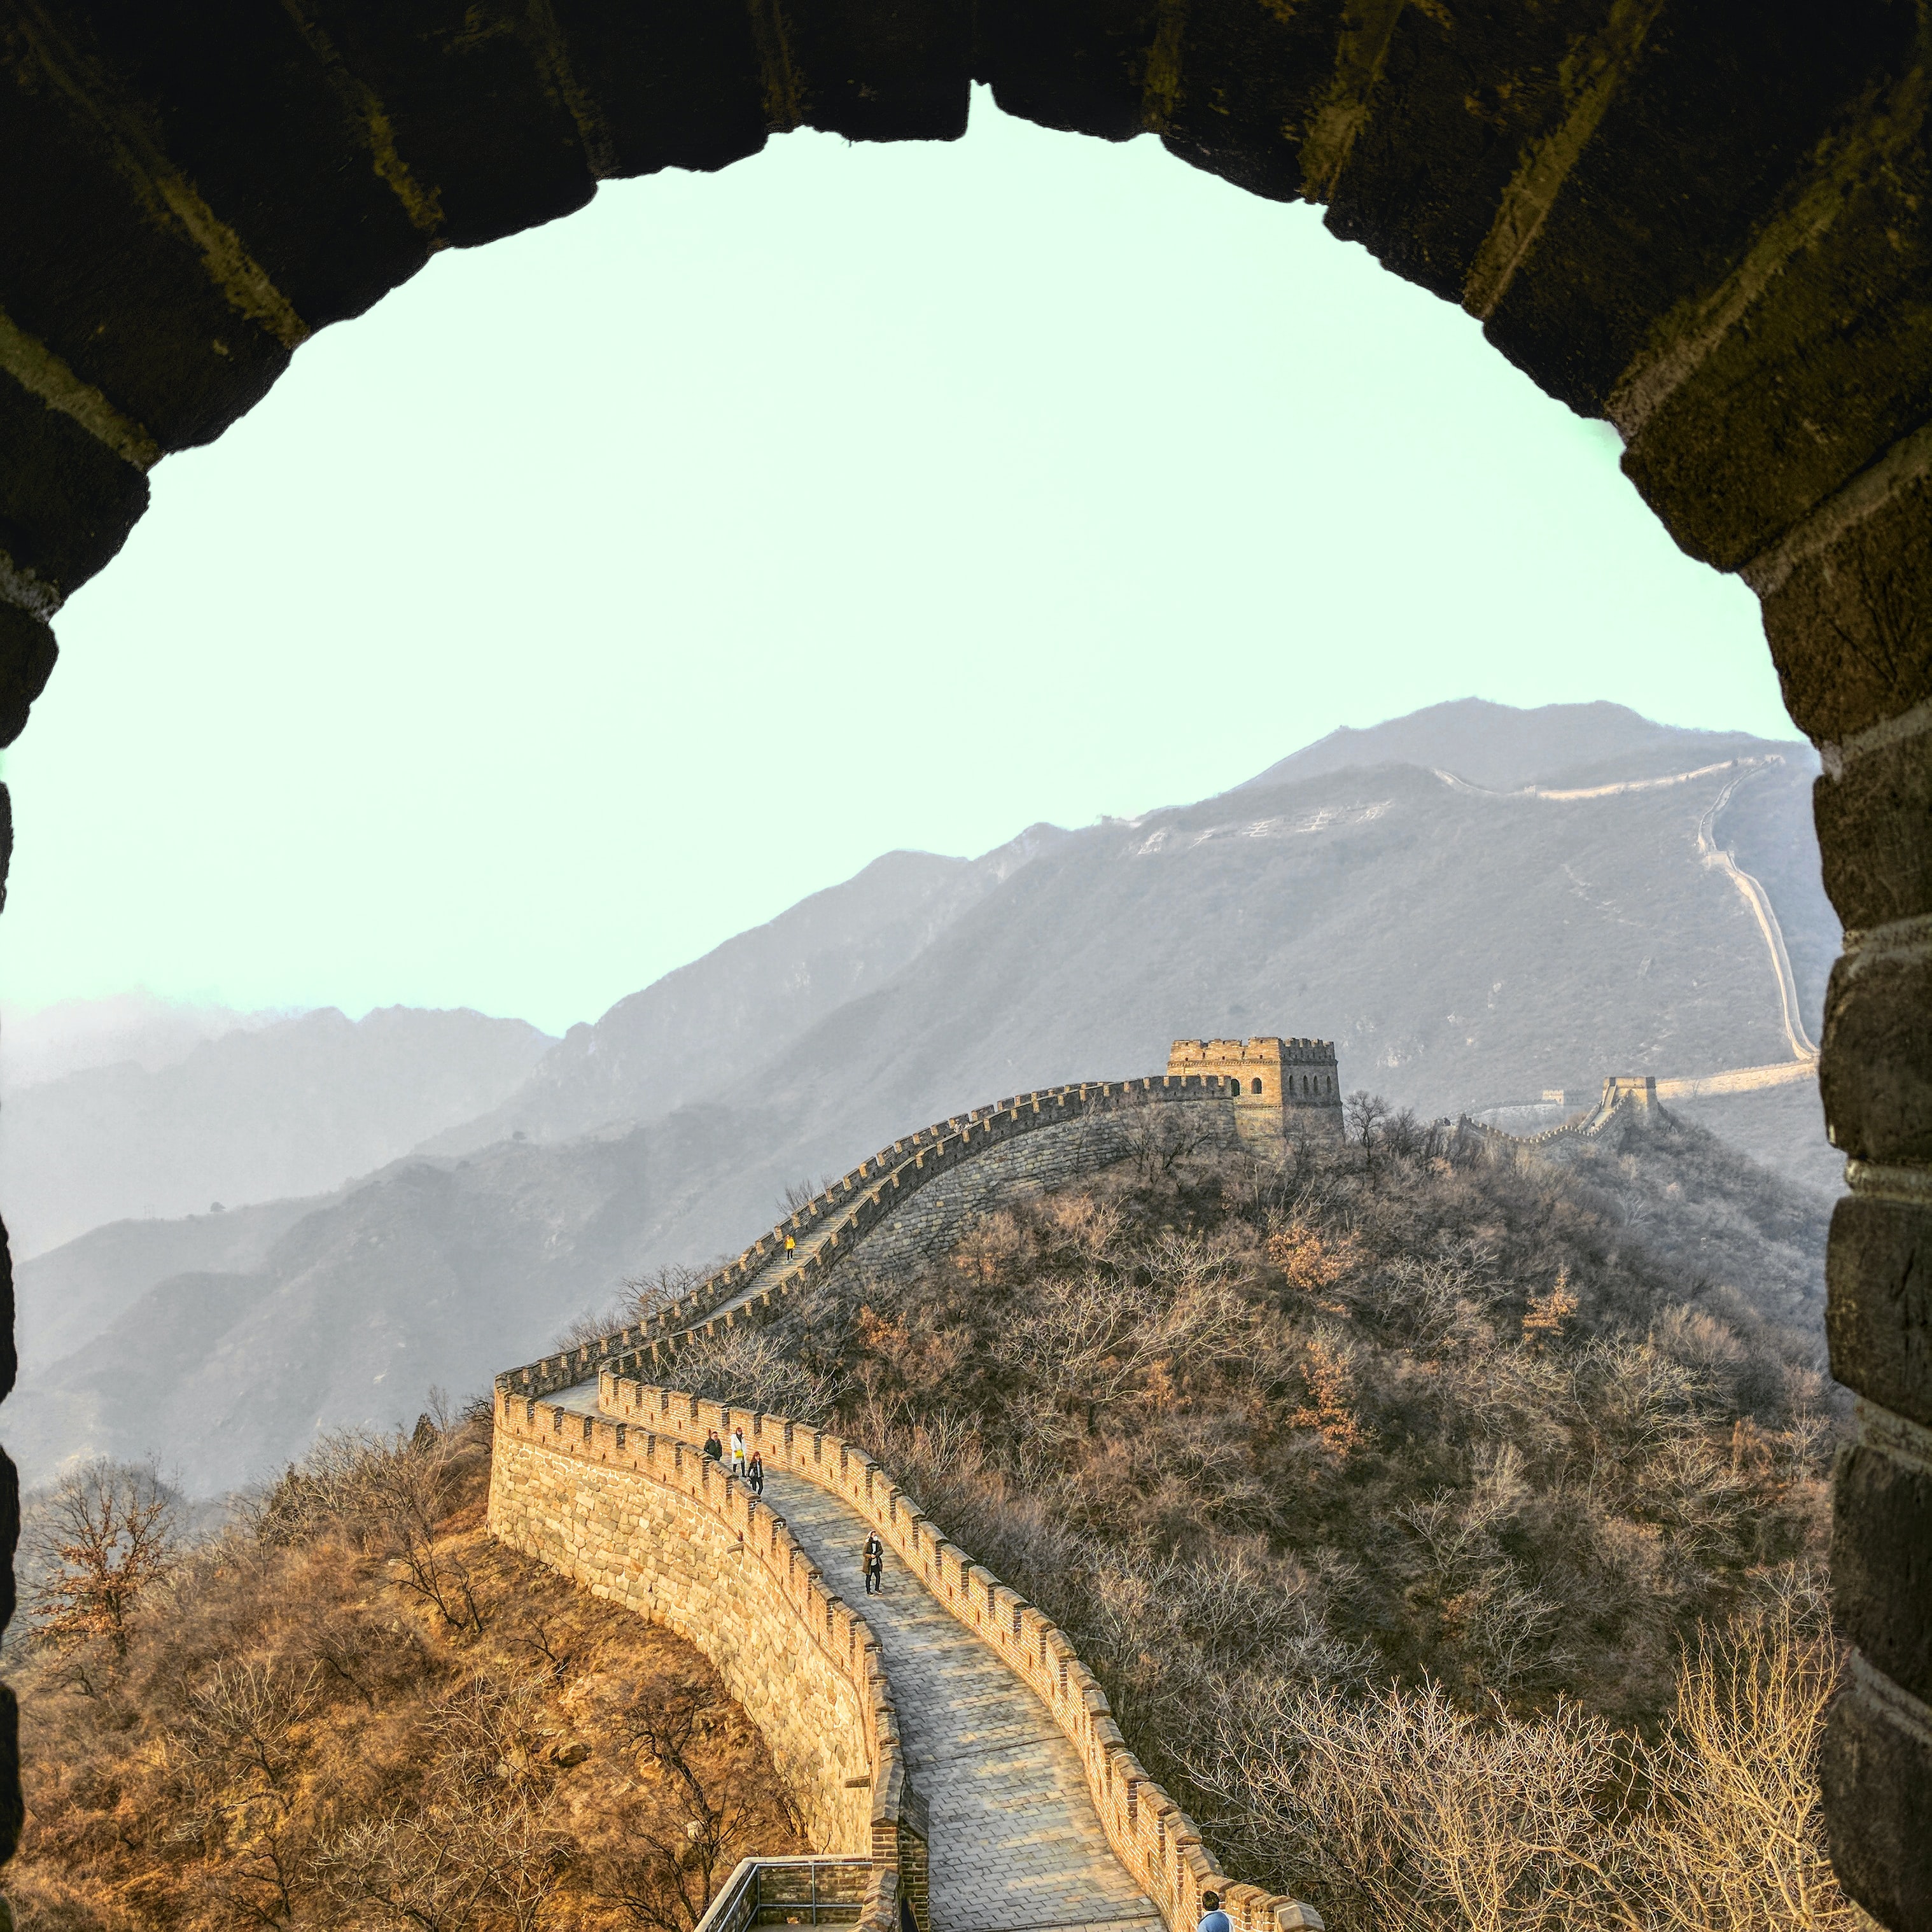 Builders of China's Great Wall